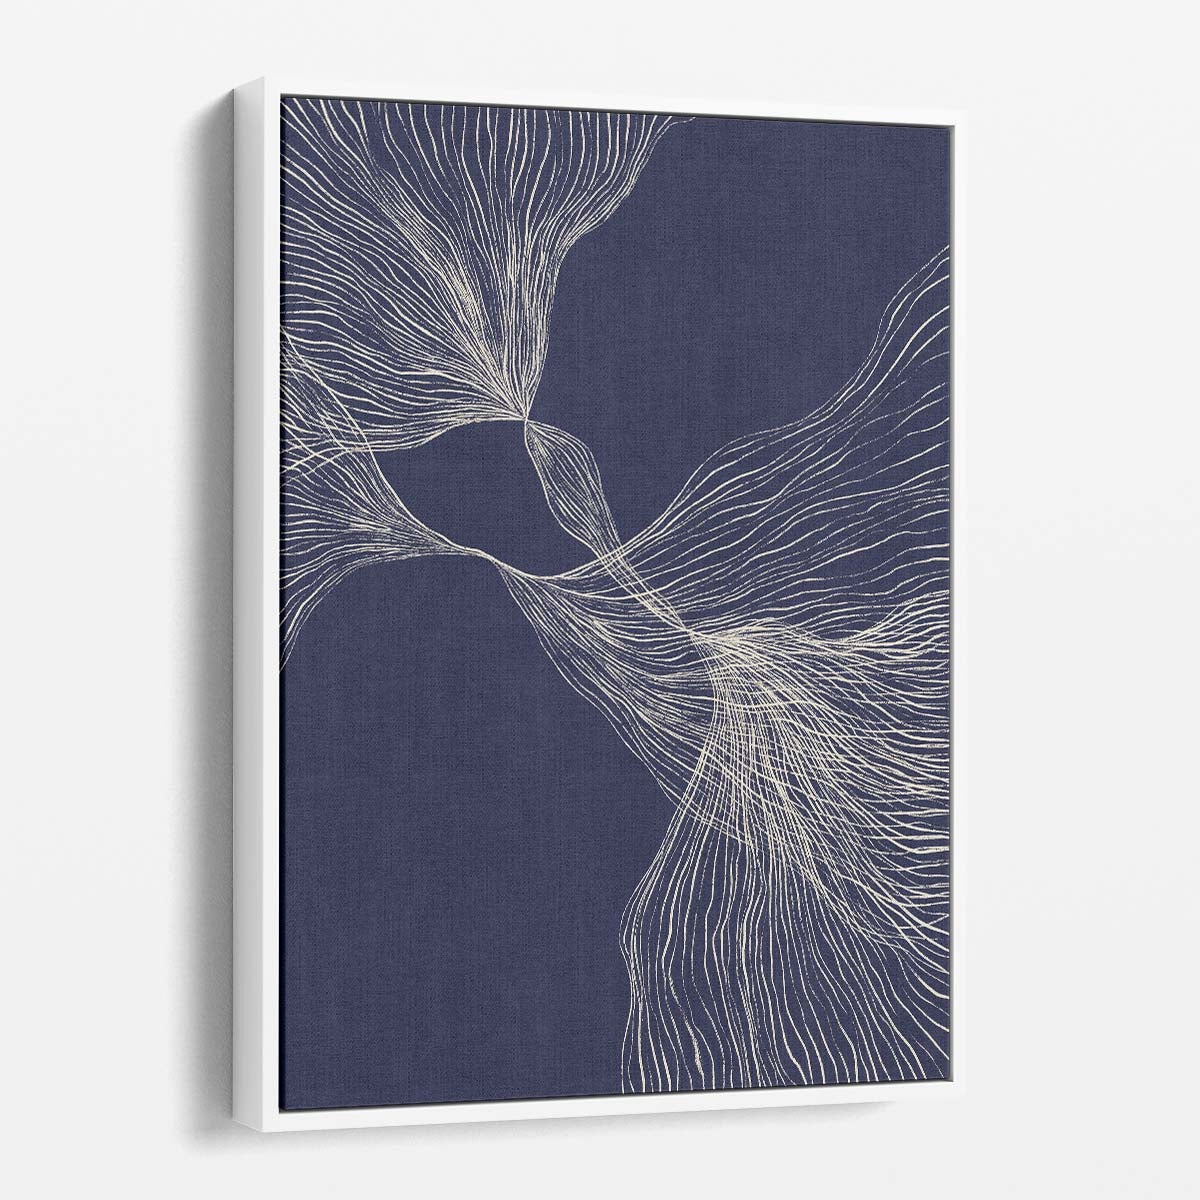 Minimalist Blue Waves Abstract Line Art Illustration Wall Decor by Luxuriance Designs, made in USA